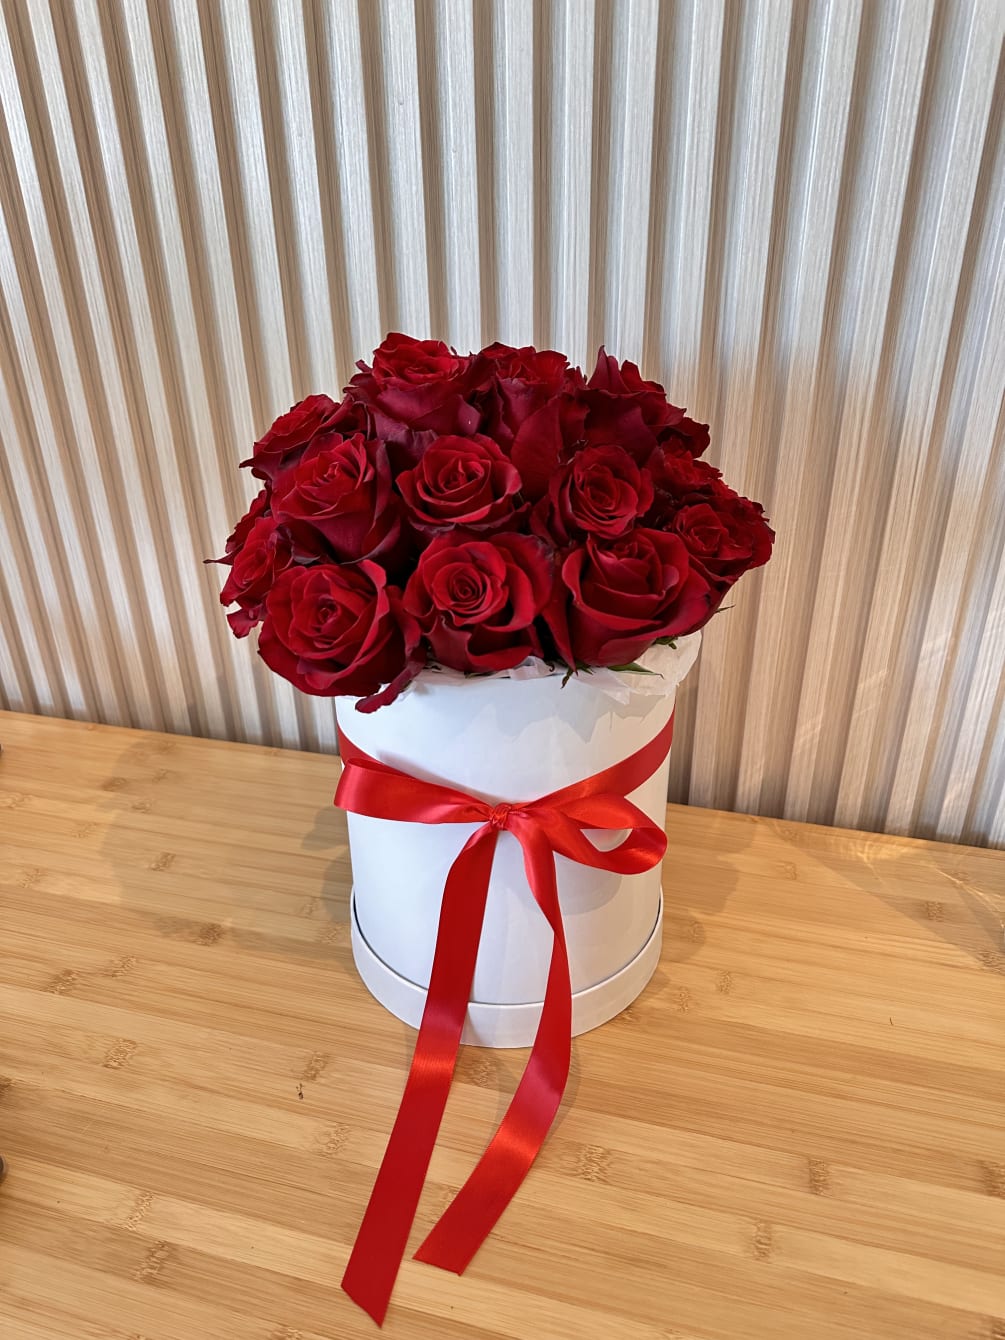 White box with red roses.